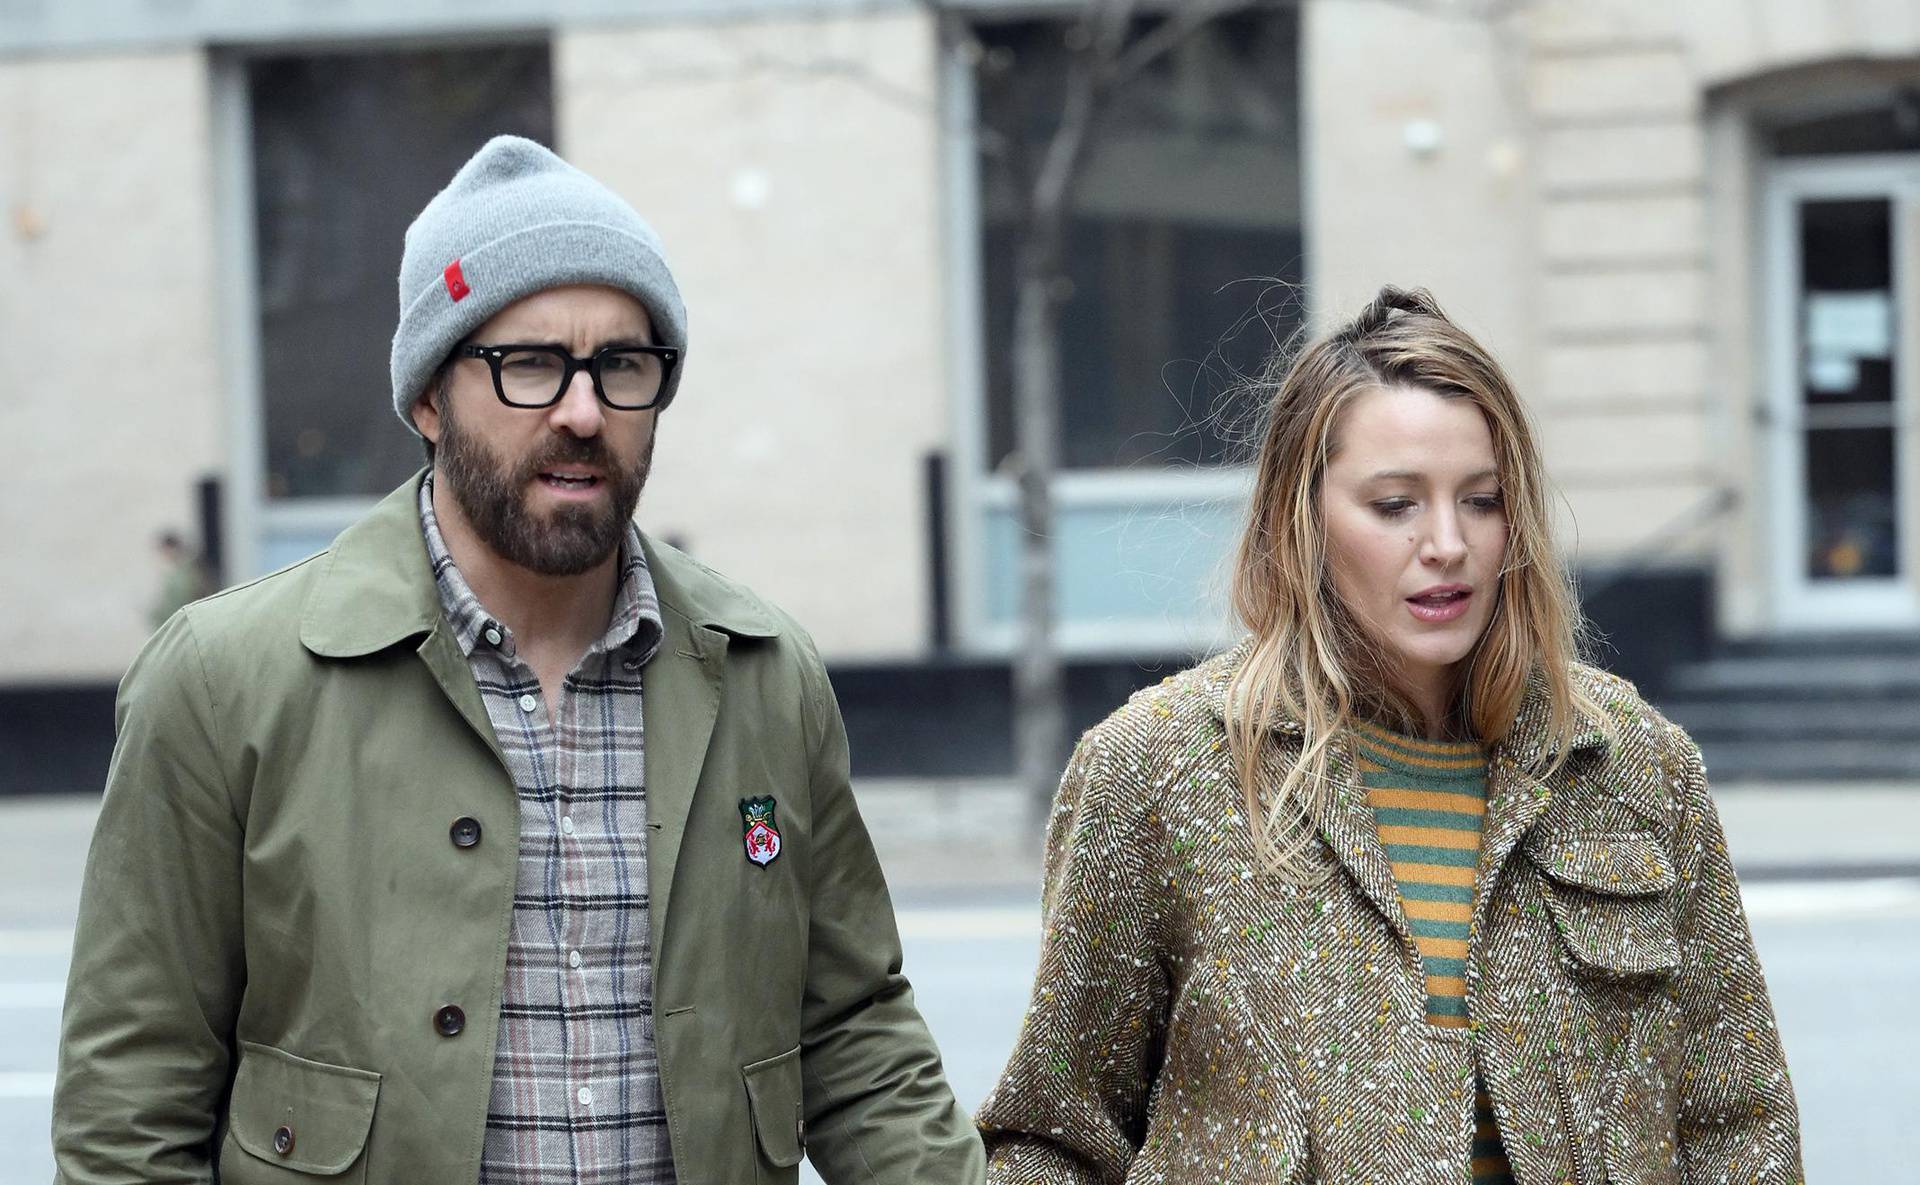 Blake Lively And Ryan Reynolds Holding Hadns While Out For A Morning Walk In New York City